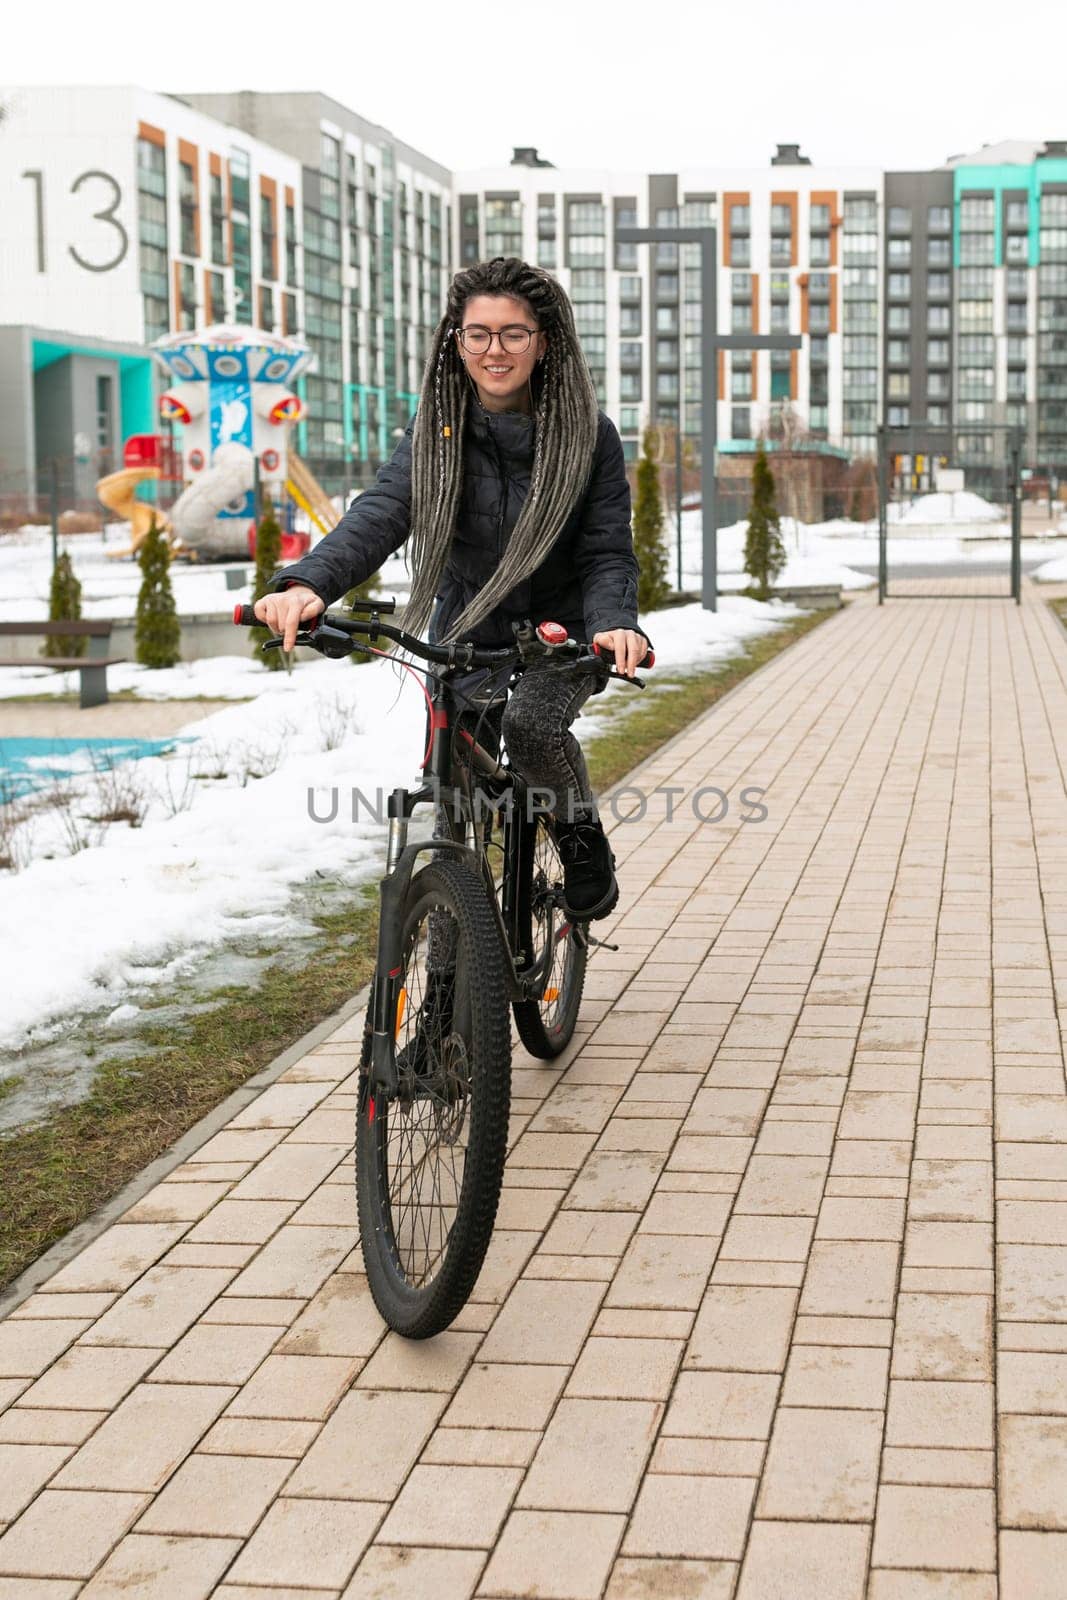 Lifestyle concept, young European woman rides around the city on a bicycle.